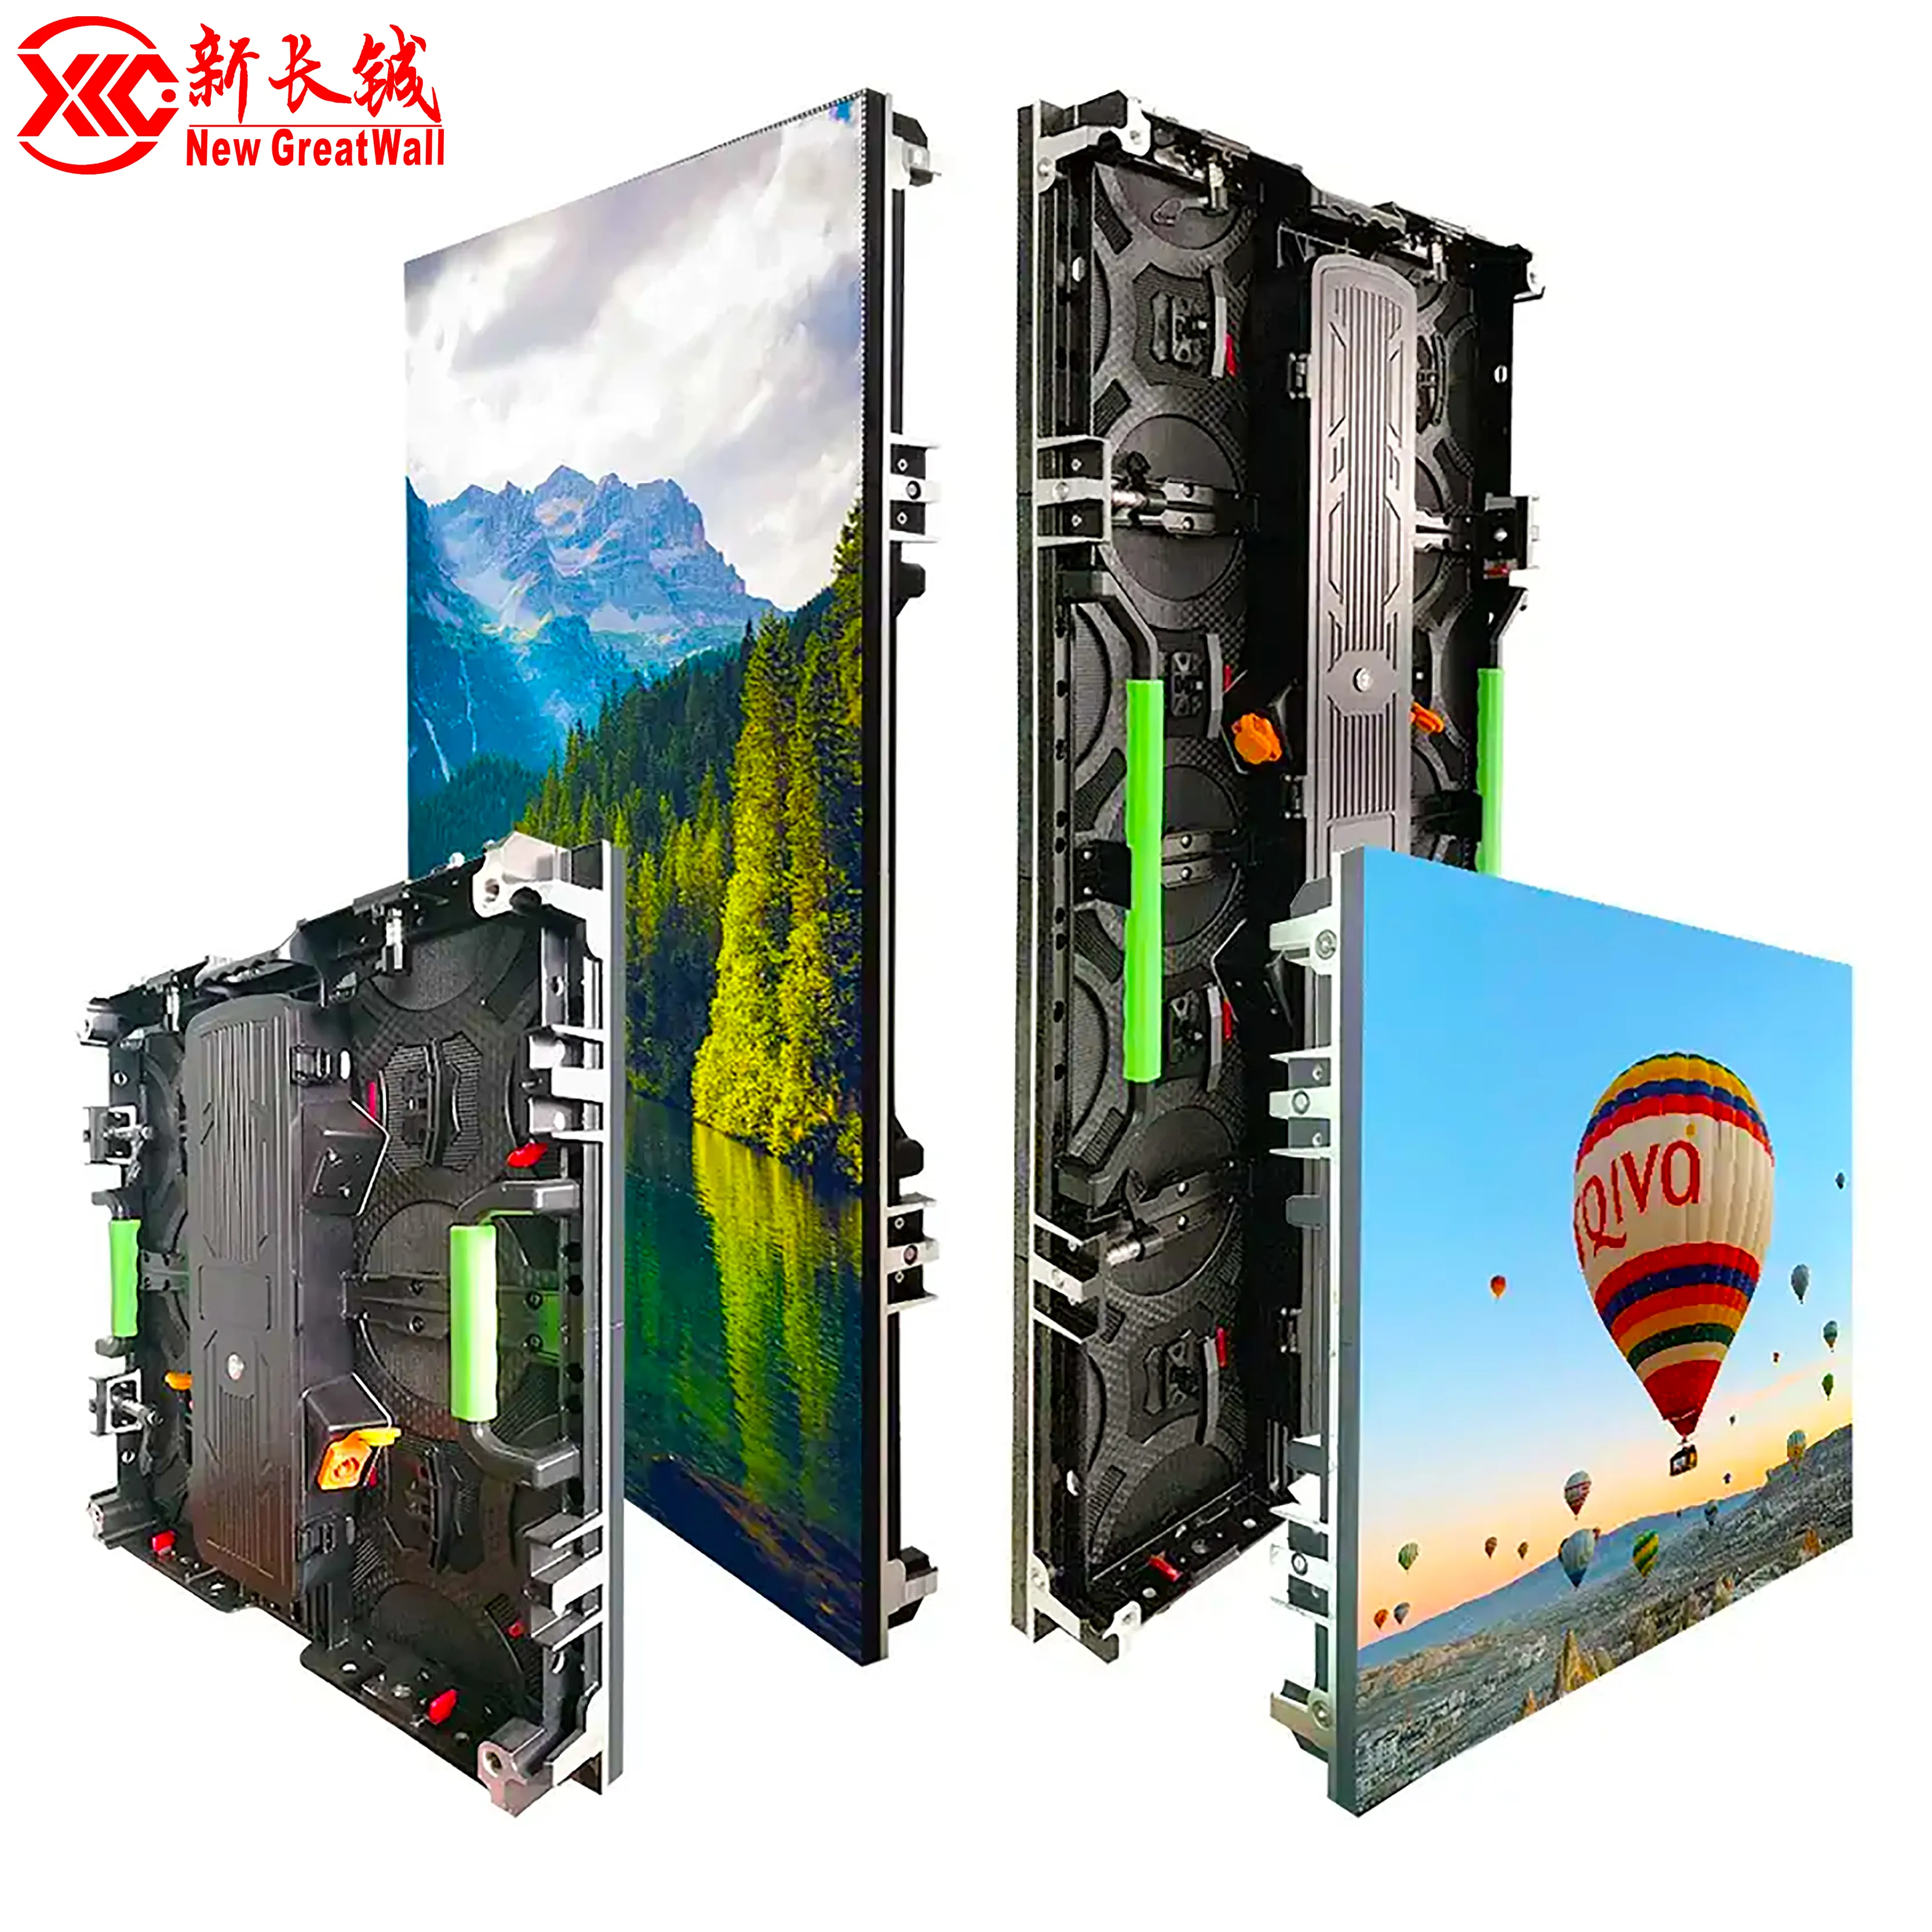 HD Advertising Led Display Panel P3.91 P4.81 SMD Full Color Outdoor Led Video Wall 500 x 500mm